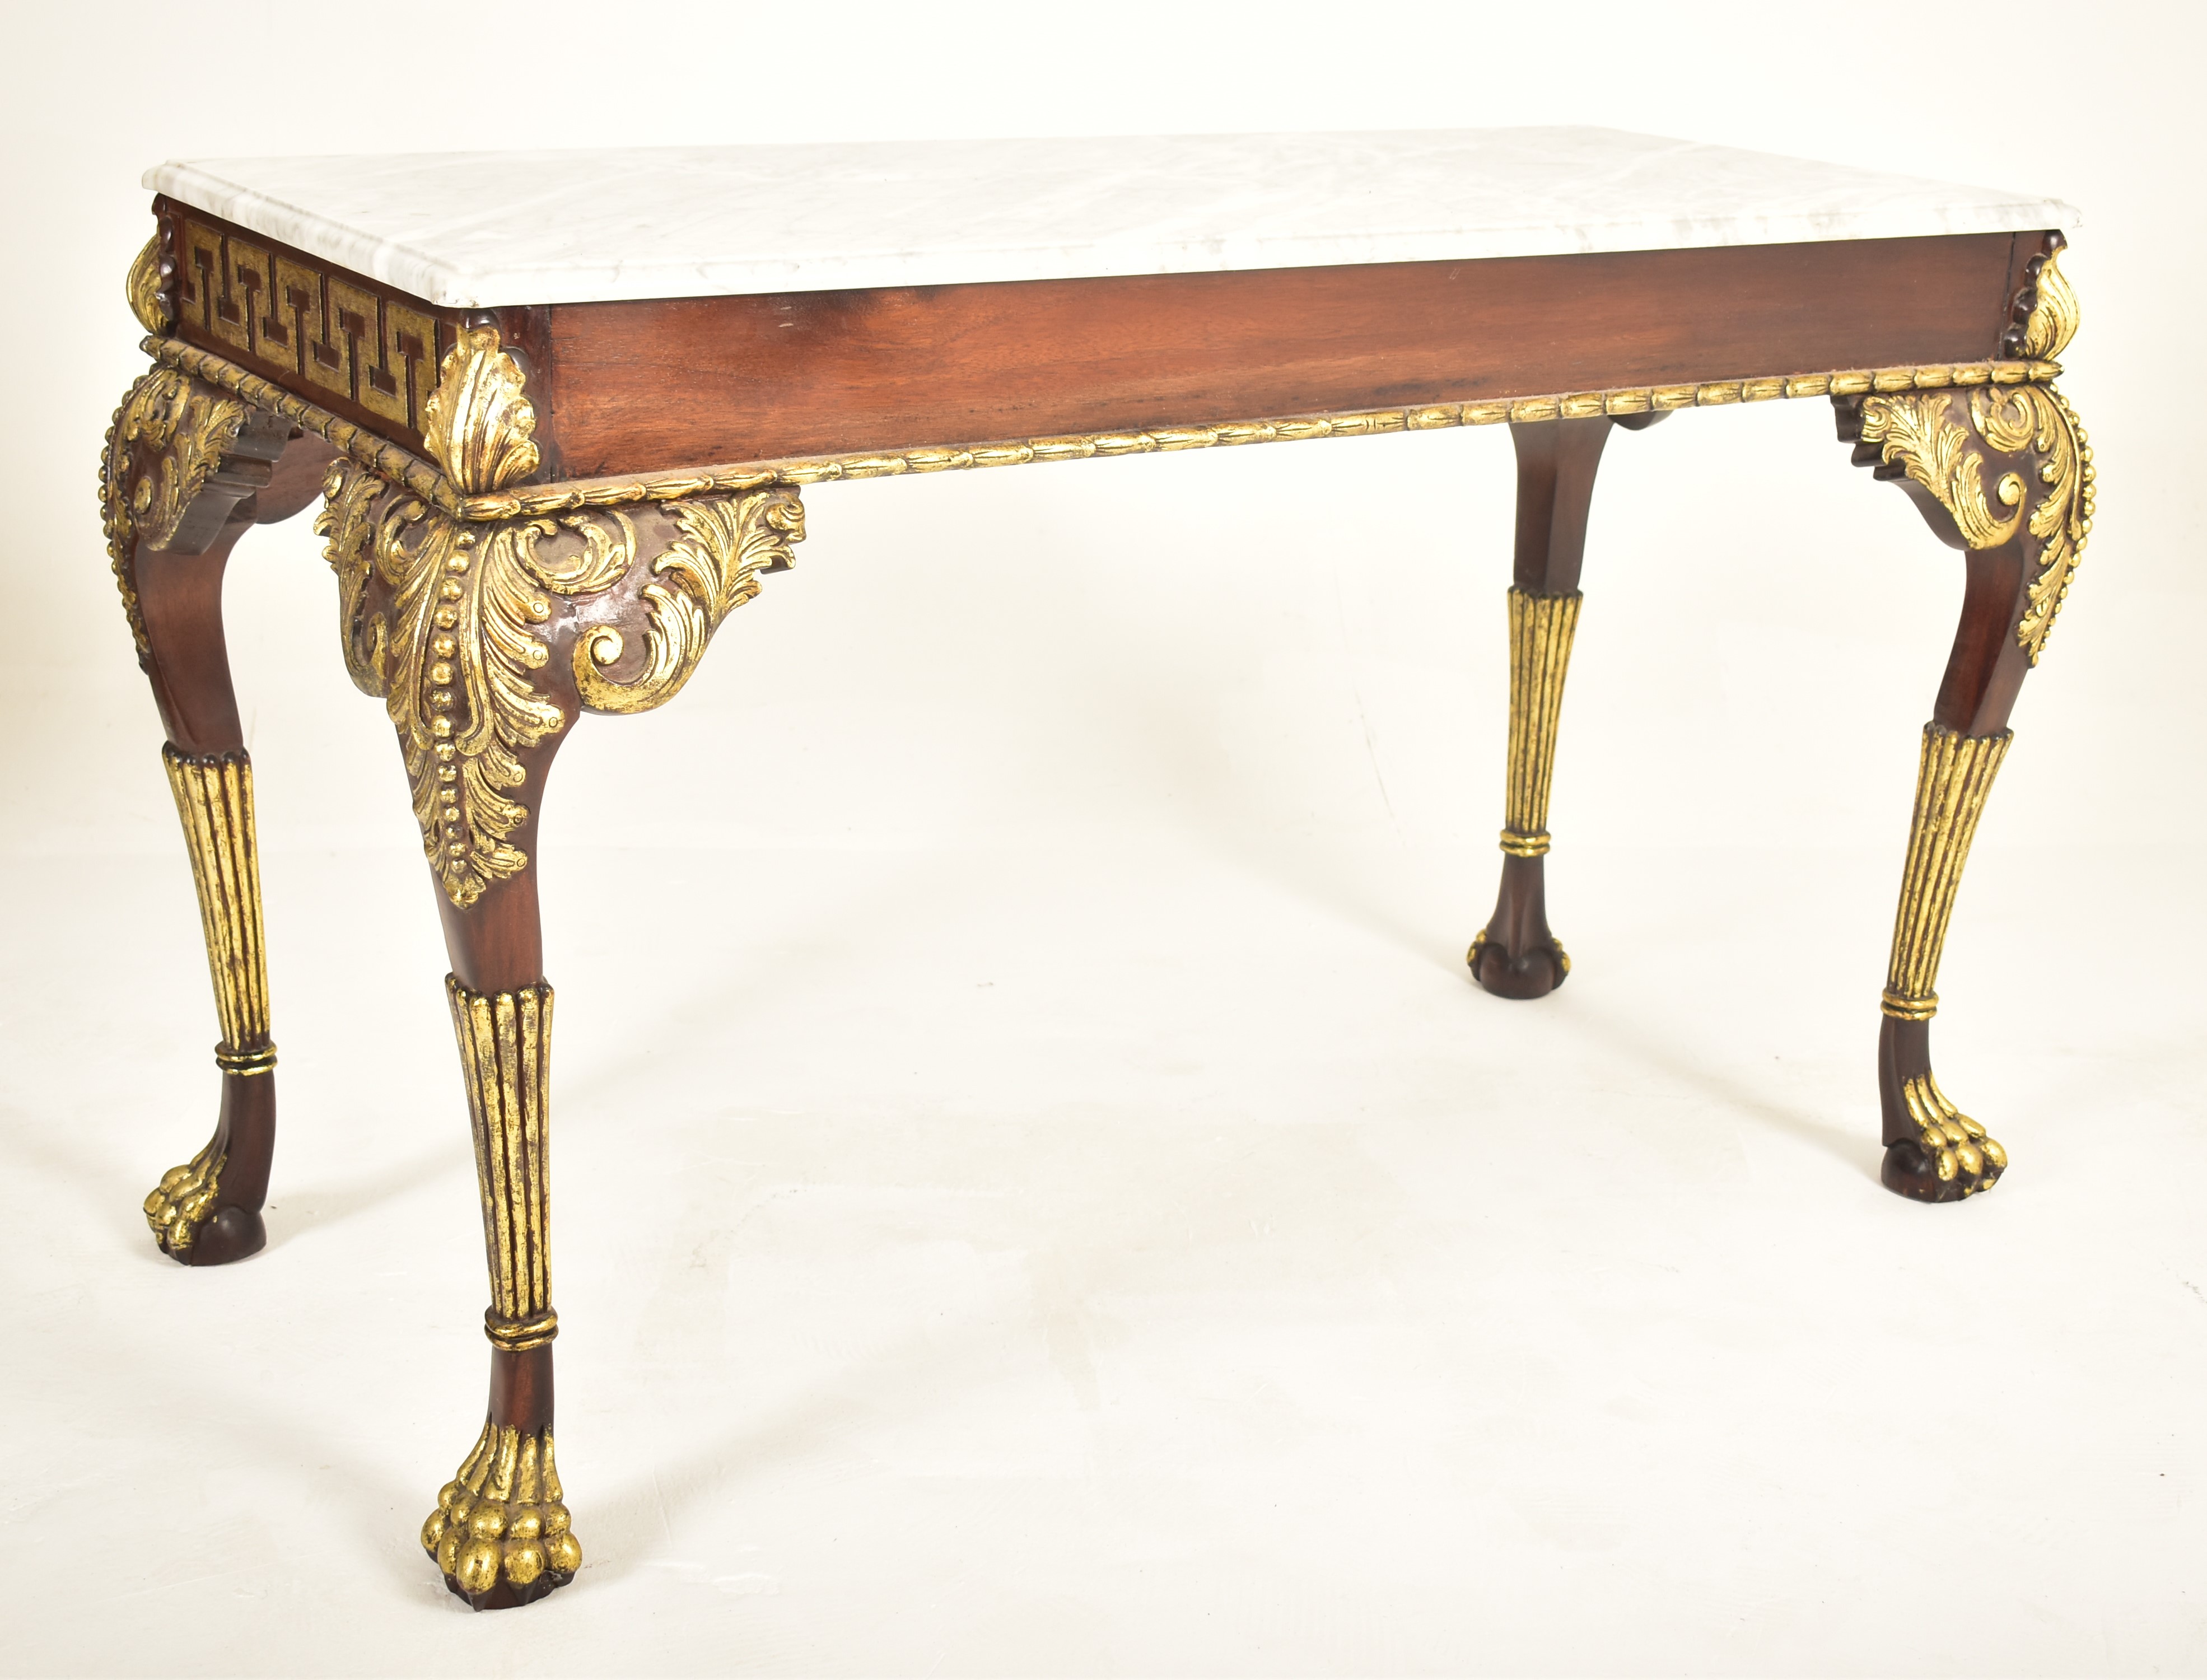 WILLIAM KENT 18TH CENTURY INSPIRED GILT WOOD & MARBLE HALL TABLE - Image 8 of 8